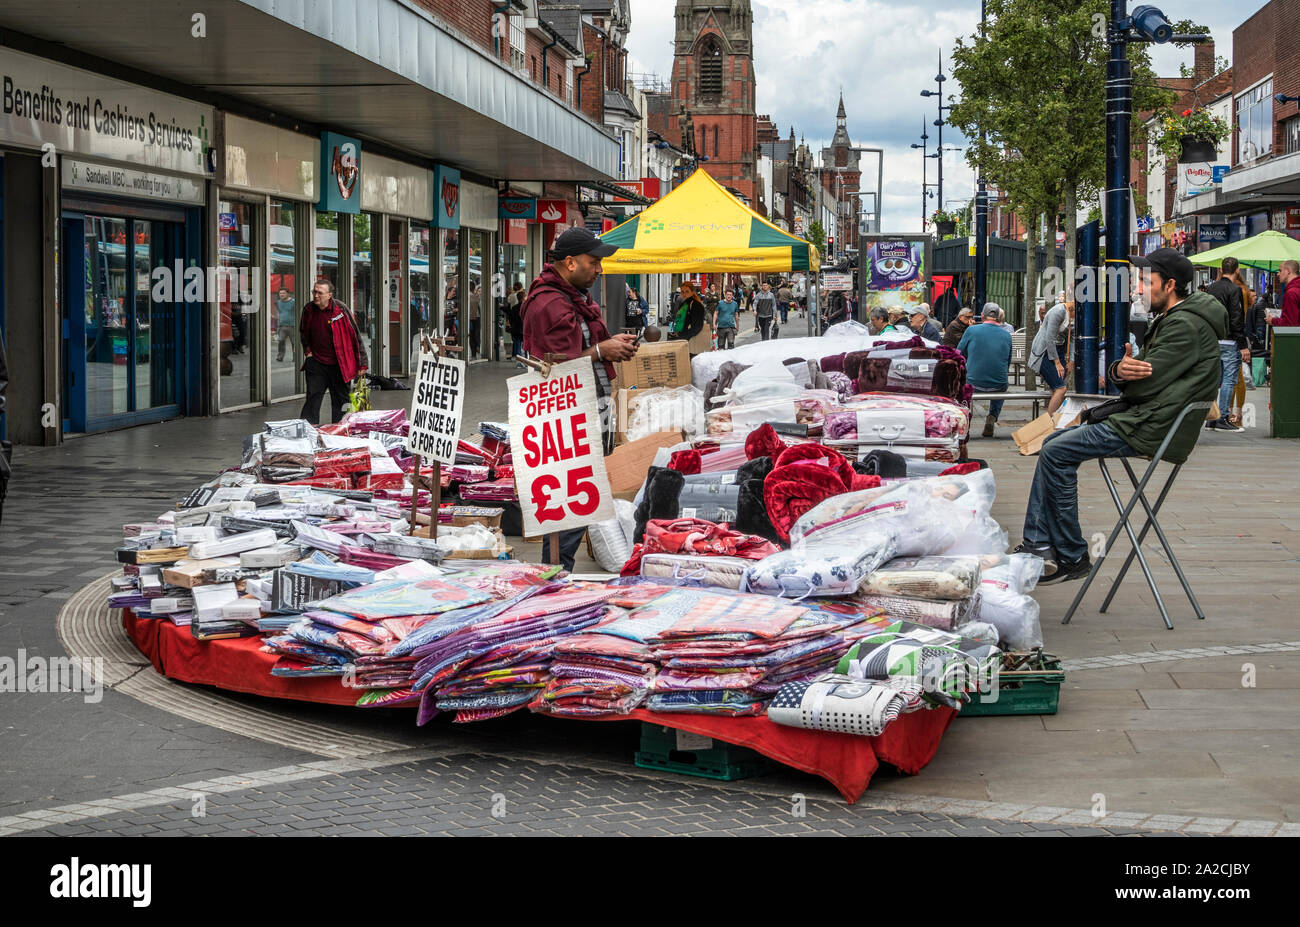 Local outdoor market stall, High Street, West Bromwich, West Midlands, UK  Stock Photo - Alamy